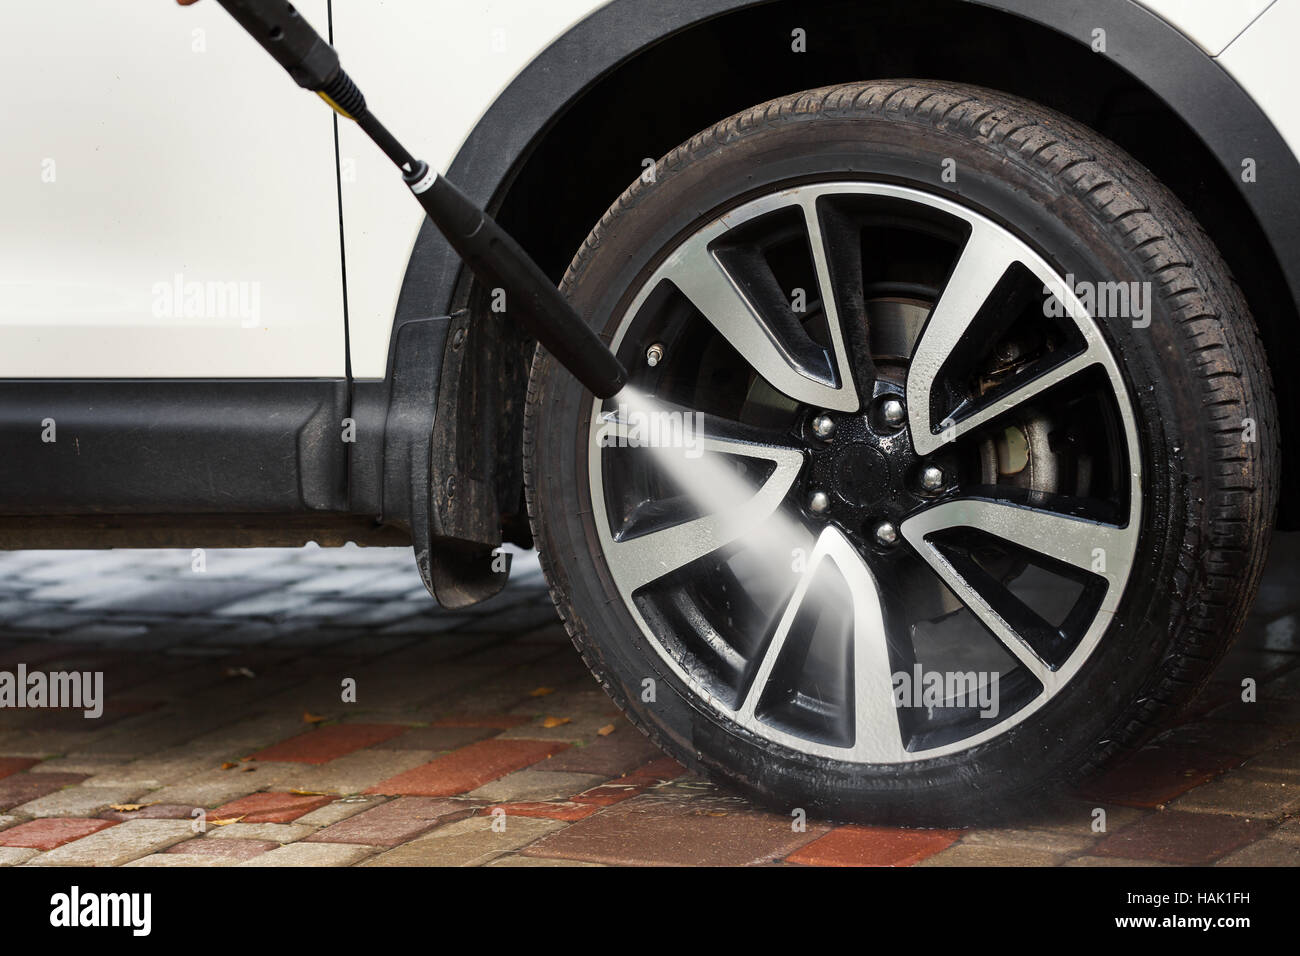 car wheel washing with high pressure washer Stock Photo